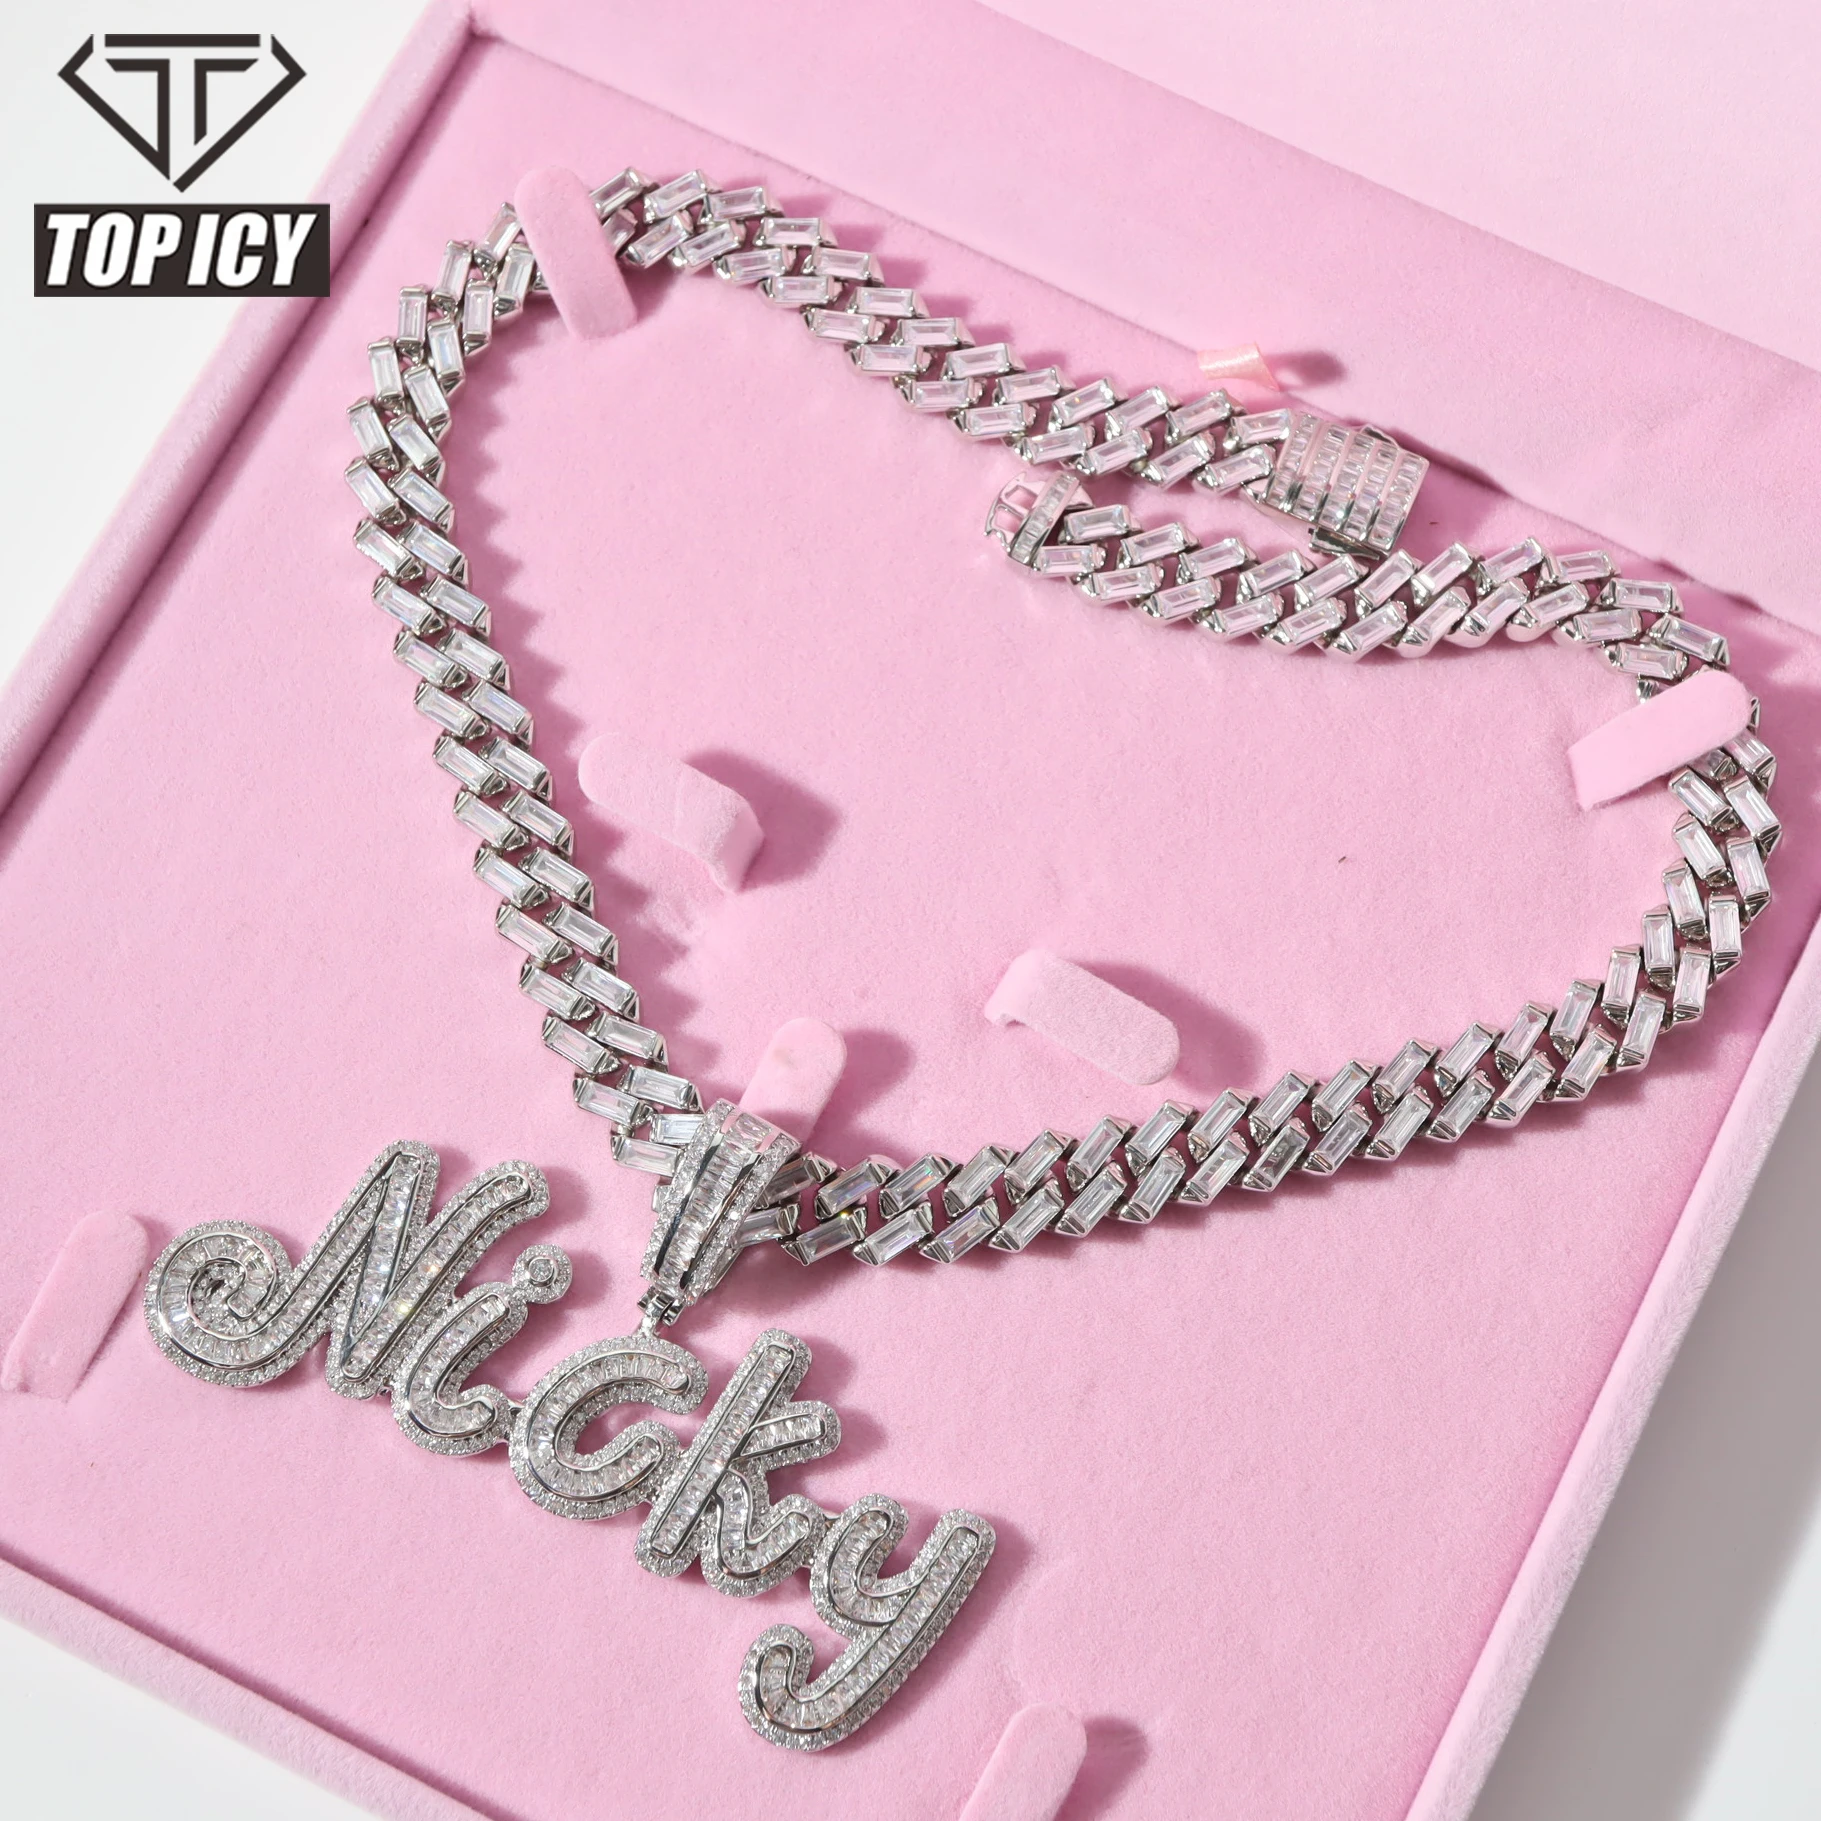 Baguette Cz Brush Font Big Size Custom Name Necklace Personalized Initial  26 Letters Pink Name Plate Necklace Iced Out Jewelry - Buy Name Plate  Necklace,Baguette Cz Name Necklace,Personalized Name Letter Jewelry Product